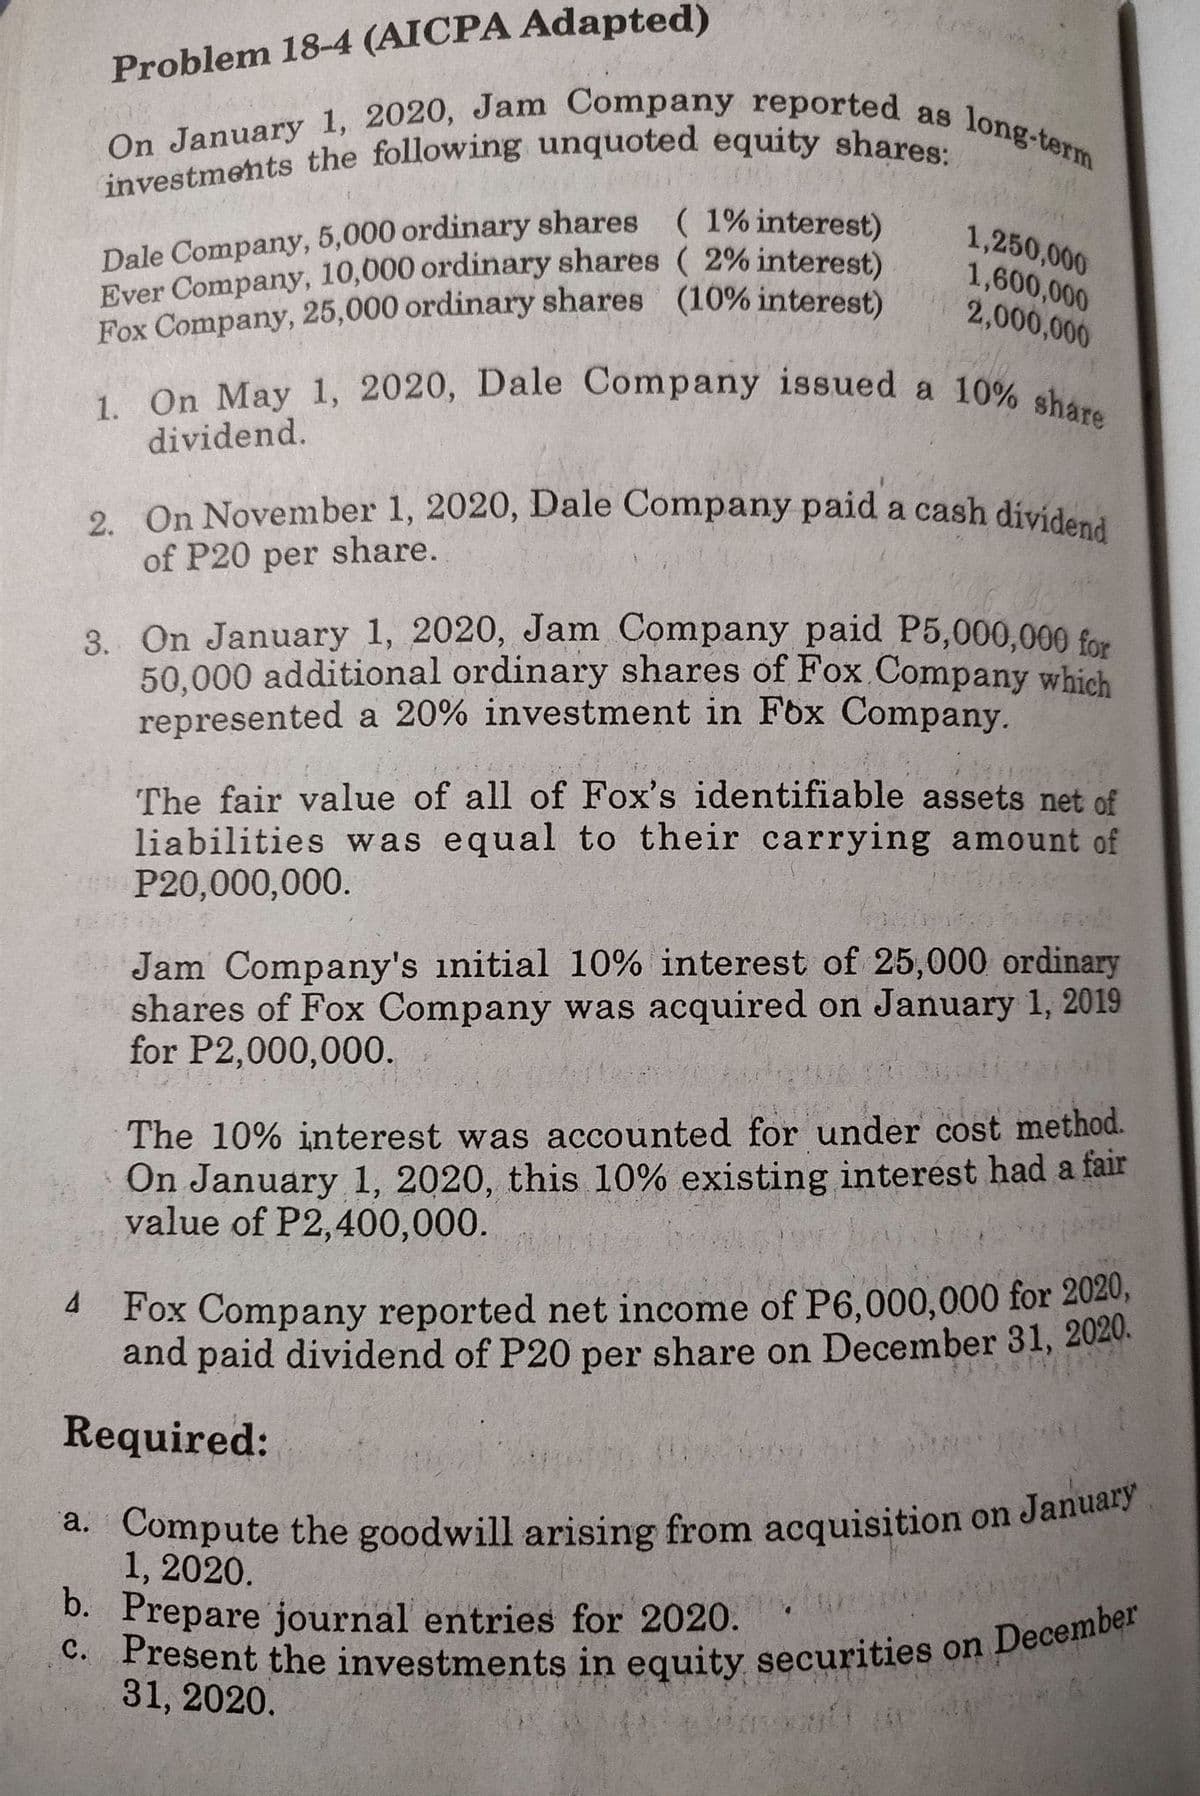 Dale Company, 5,000 ordinary shares (1% interest)
c. Present the investments in equity securities on December
a. Compute the goodwill arising from acquisition on January
On January 1, 2020, Jam Company reported as long-term
2. On November 1, 2020, Dale Company paid a cash dividend
1. On May 1, 2020, Dale Company issued a 10% share
Problem 18-4 (AICPA Adapted)
as long-term
Ever Company, 10,000 ordinary shares ( 2% interest)
Fox Company, 25,000 ordinary shares (10% interest)
1,250,000
1,600,000
2,000,000
dividend.
of P20 per share.
3. On January 1, 2020, Jam Company paid P5,000,000 for
50,000 additional ordinary shares of Fox Company which
represented a 20% investment in Fox Company.
The fair value of all of Fox's identifiable assets net of
liabilities was equal to their carrying amount of
P20,000,000.
Jam Company's initial 10% interest of 25,000 ordinary
shares of Fox Company was acquired on January 1, 2019
for P2,000,000.
The 10% interest was accounted for under cost method.
On January 1, 2020, this 10% existing interest had a fair
value of P2,400,000.
4 Fox Company reported net income of P6,000,000 for 2020,
and paid dividend of P20 per share on December 31, 2020.
Required:
1, 2020.
b. Prepare journal entries for 2020.
31, 2020.
